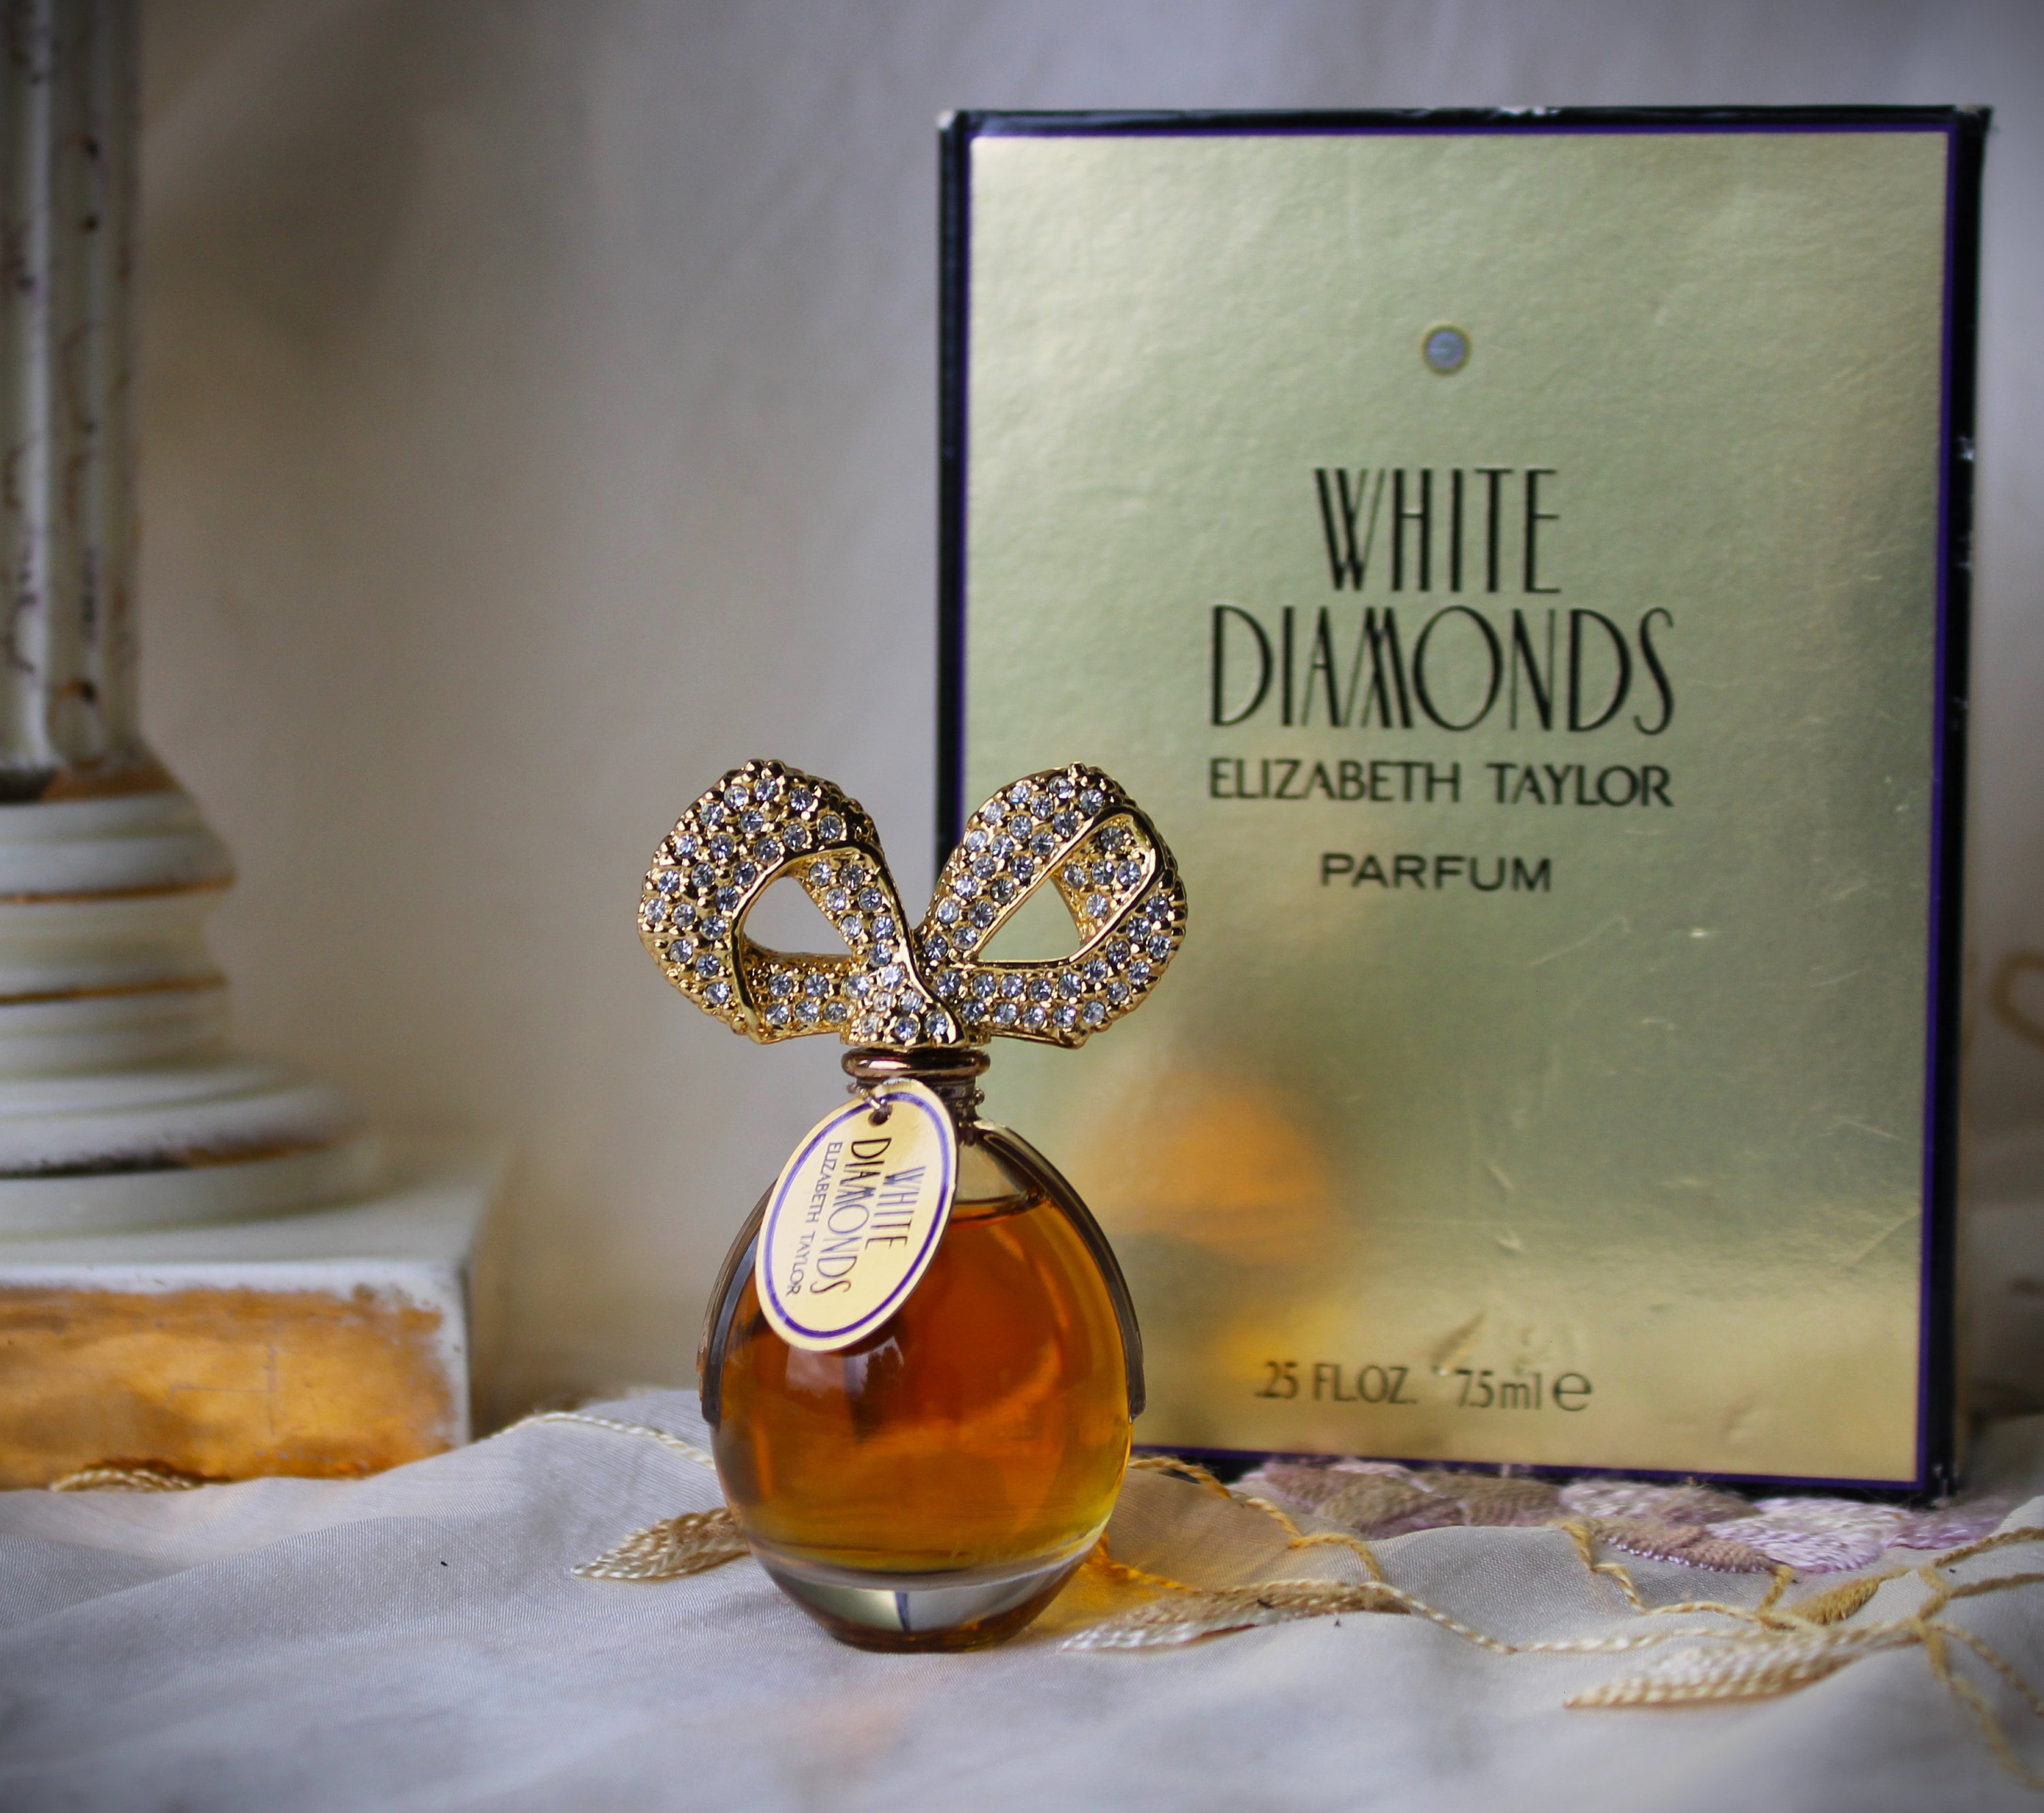 Perfect Scents Fragrances - Inspired by Elizabeth Taylor's White